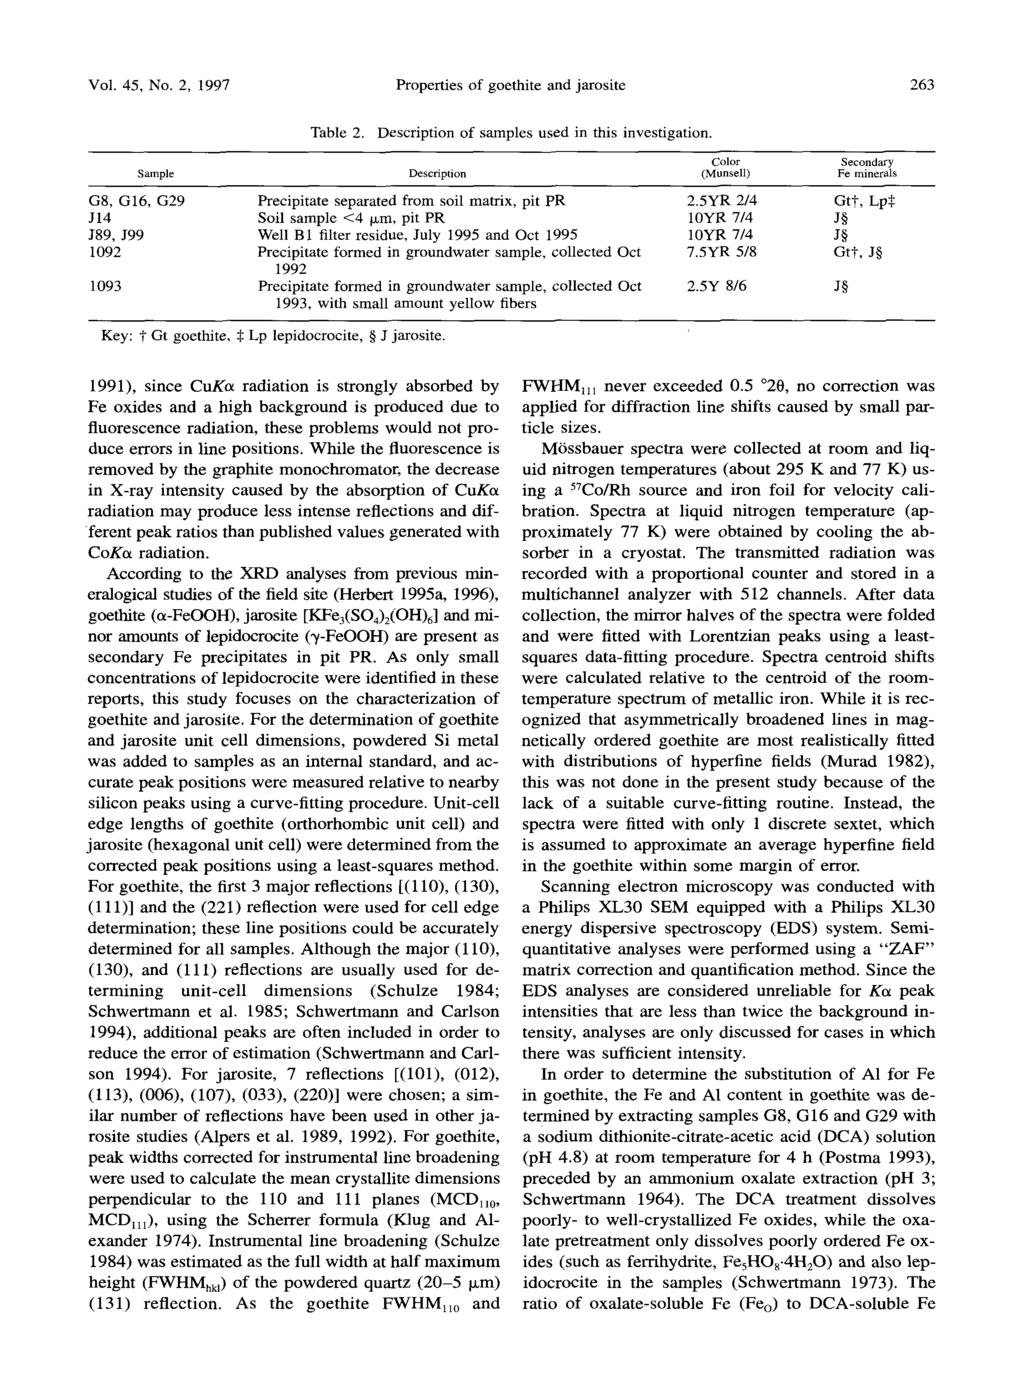 Wol. 45, No. 2, 1997 Properties of goethite and jarosite 263 Table 2. Description of samples used in this investigation.